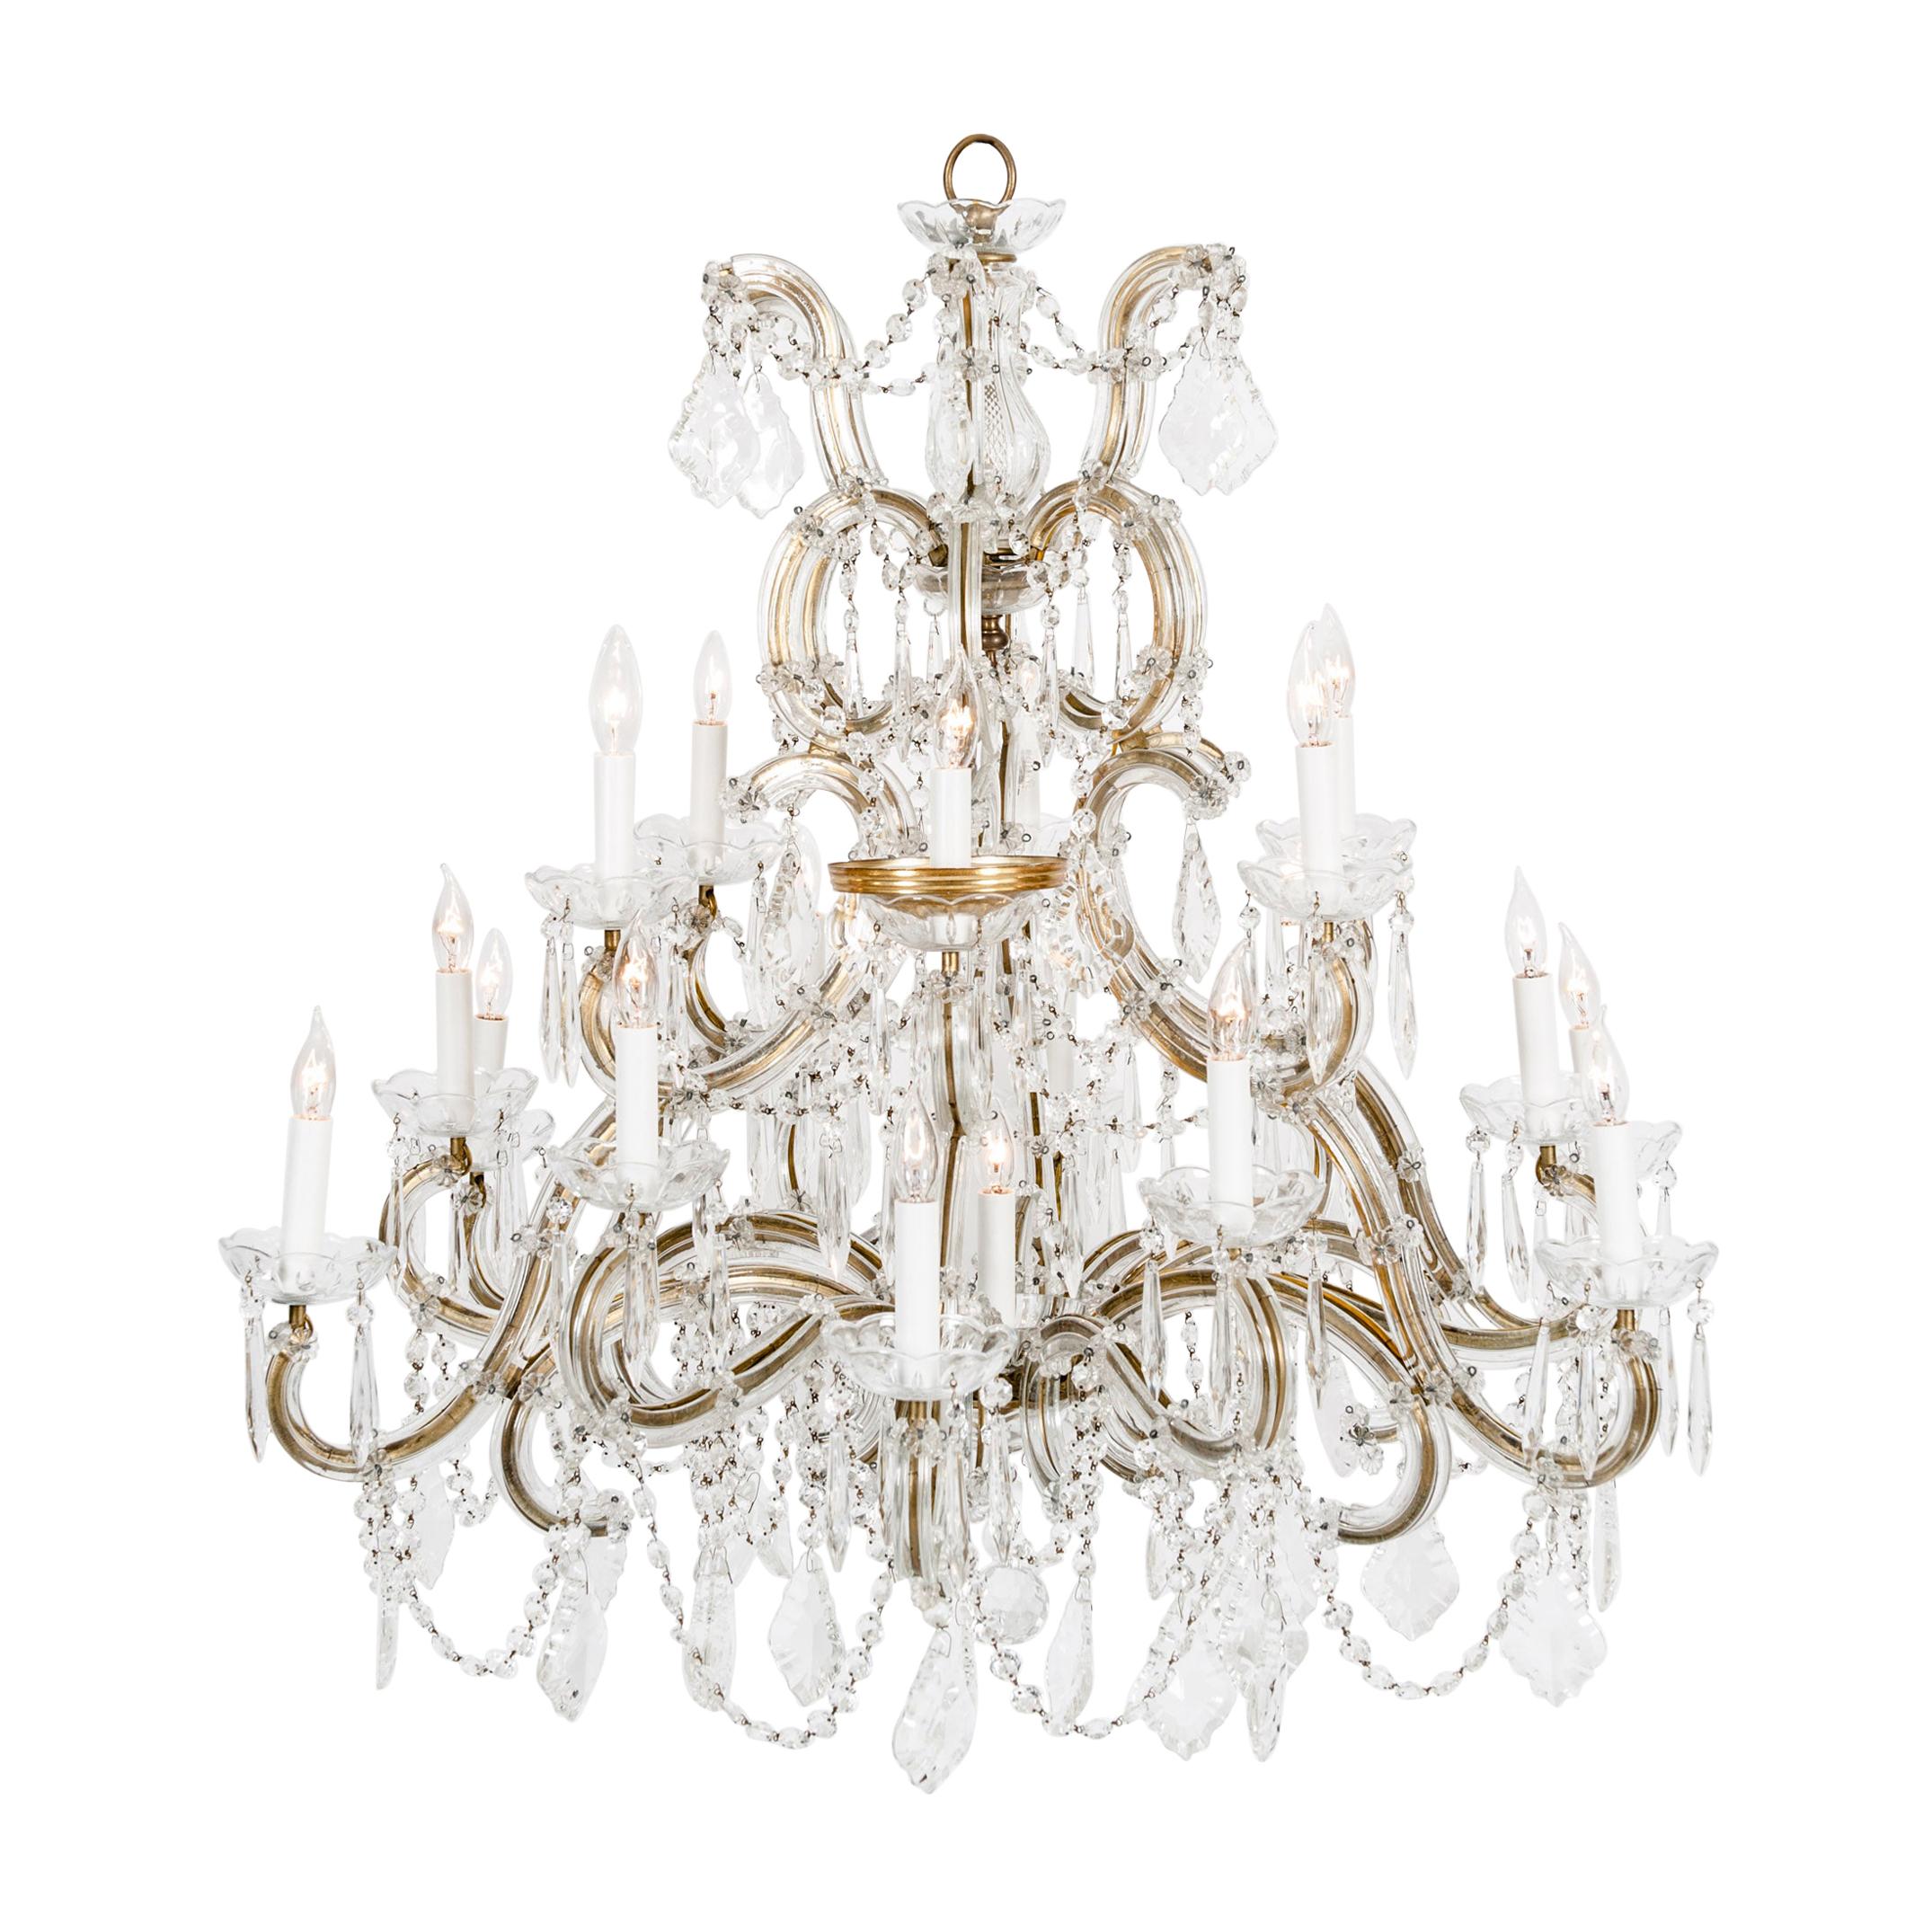 Late 19th Century Cut Crystal 18-Light Hanging Chandelier For Sale